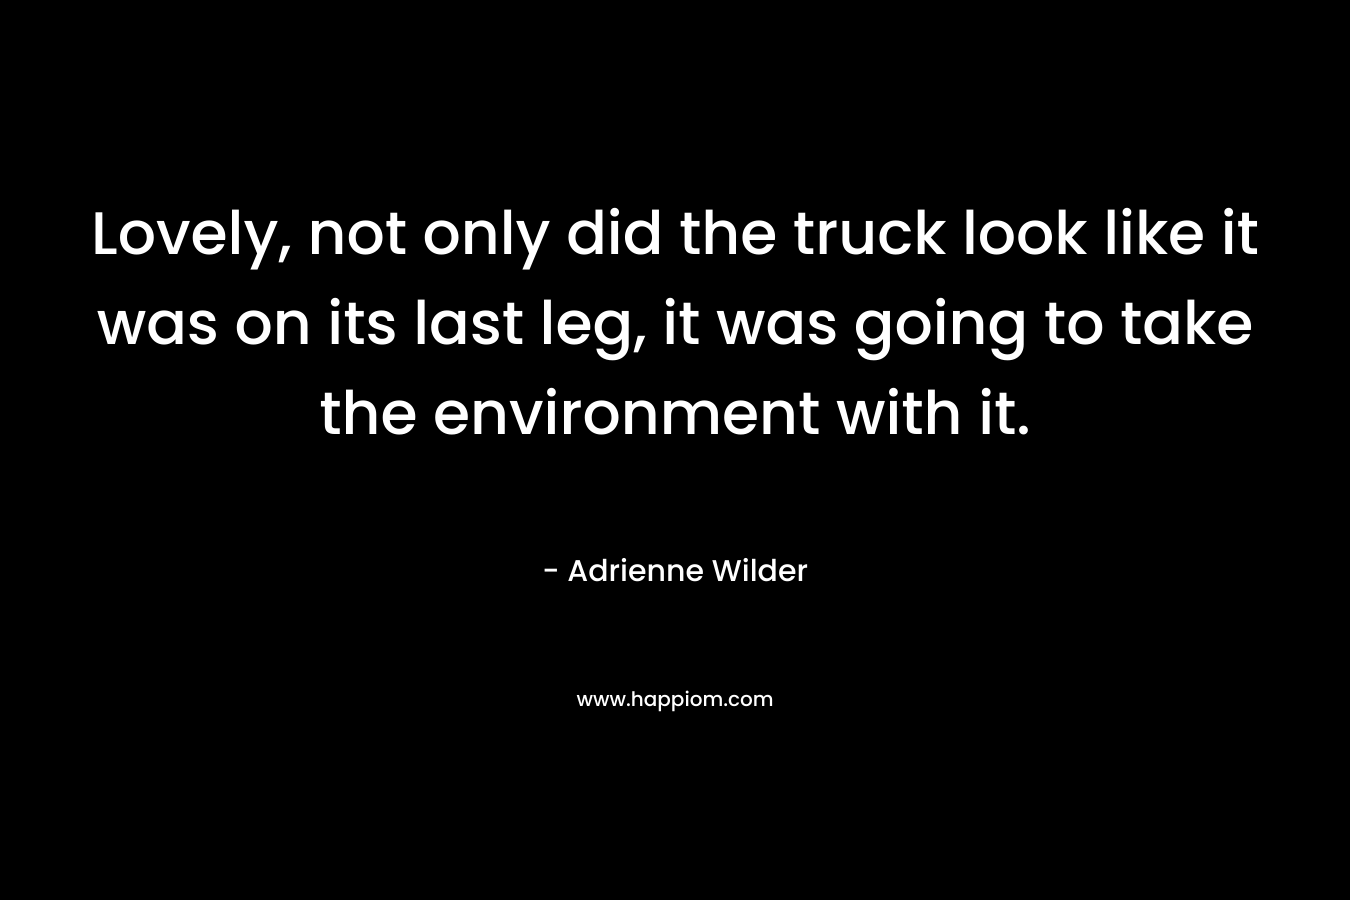 Lovely, not only did the truck look like it was on its last leg, it was going to take the environment with it.